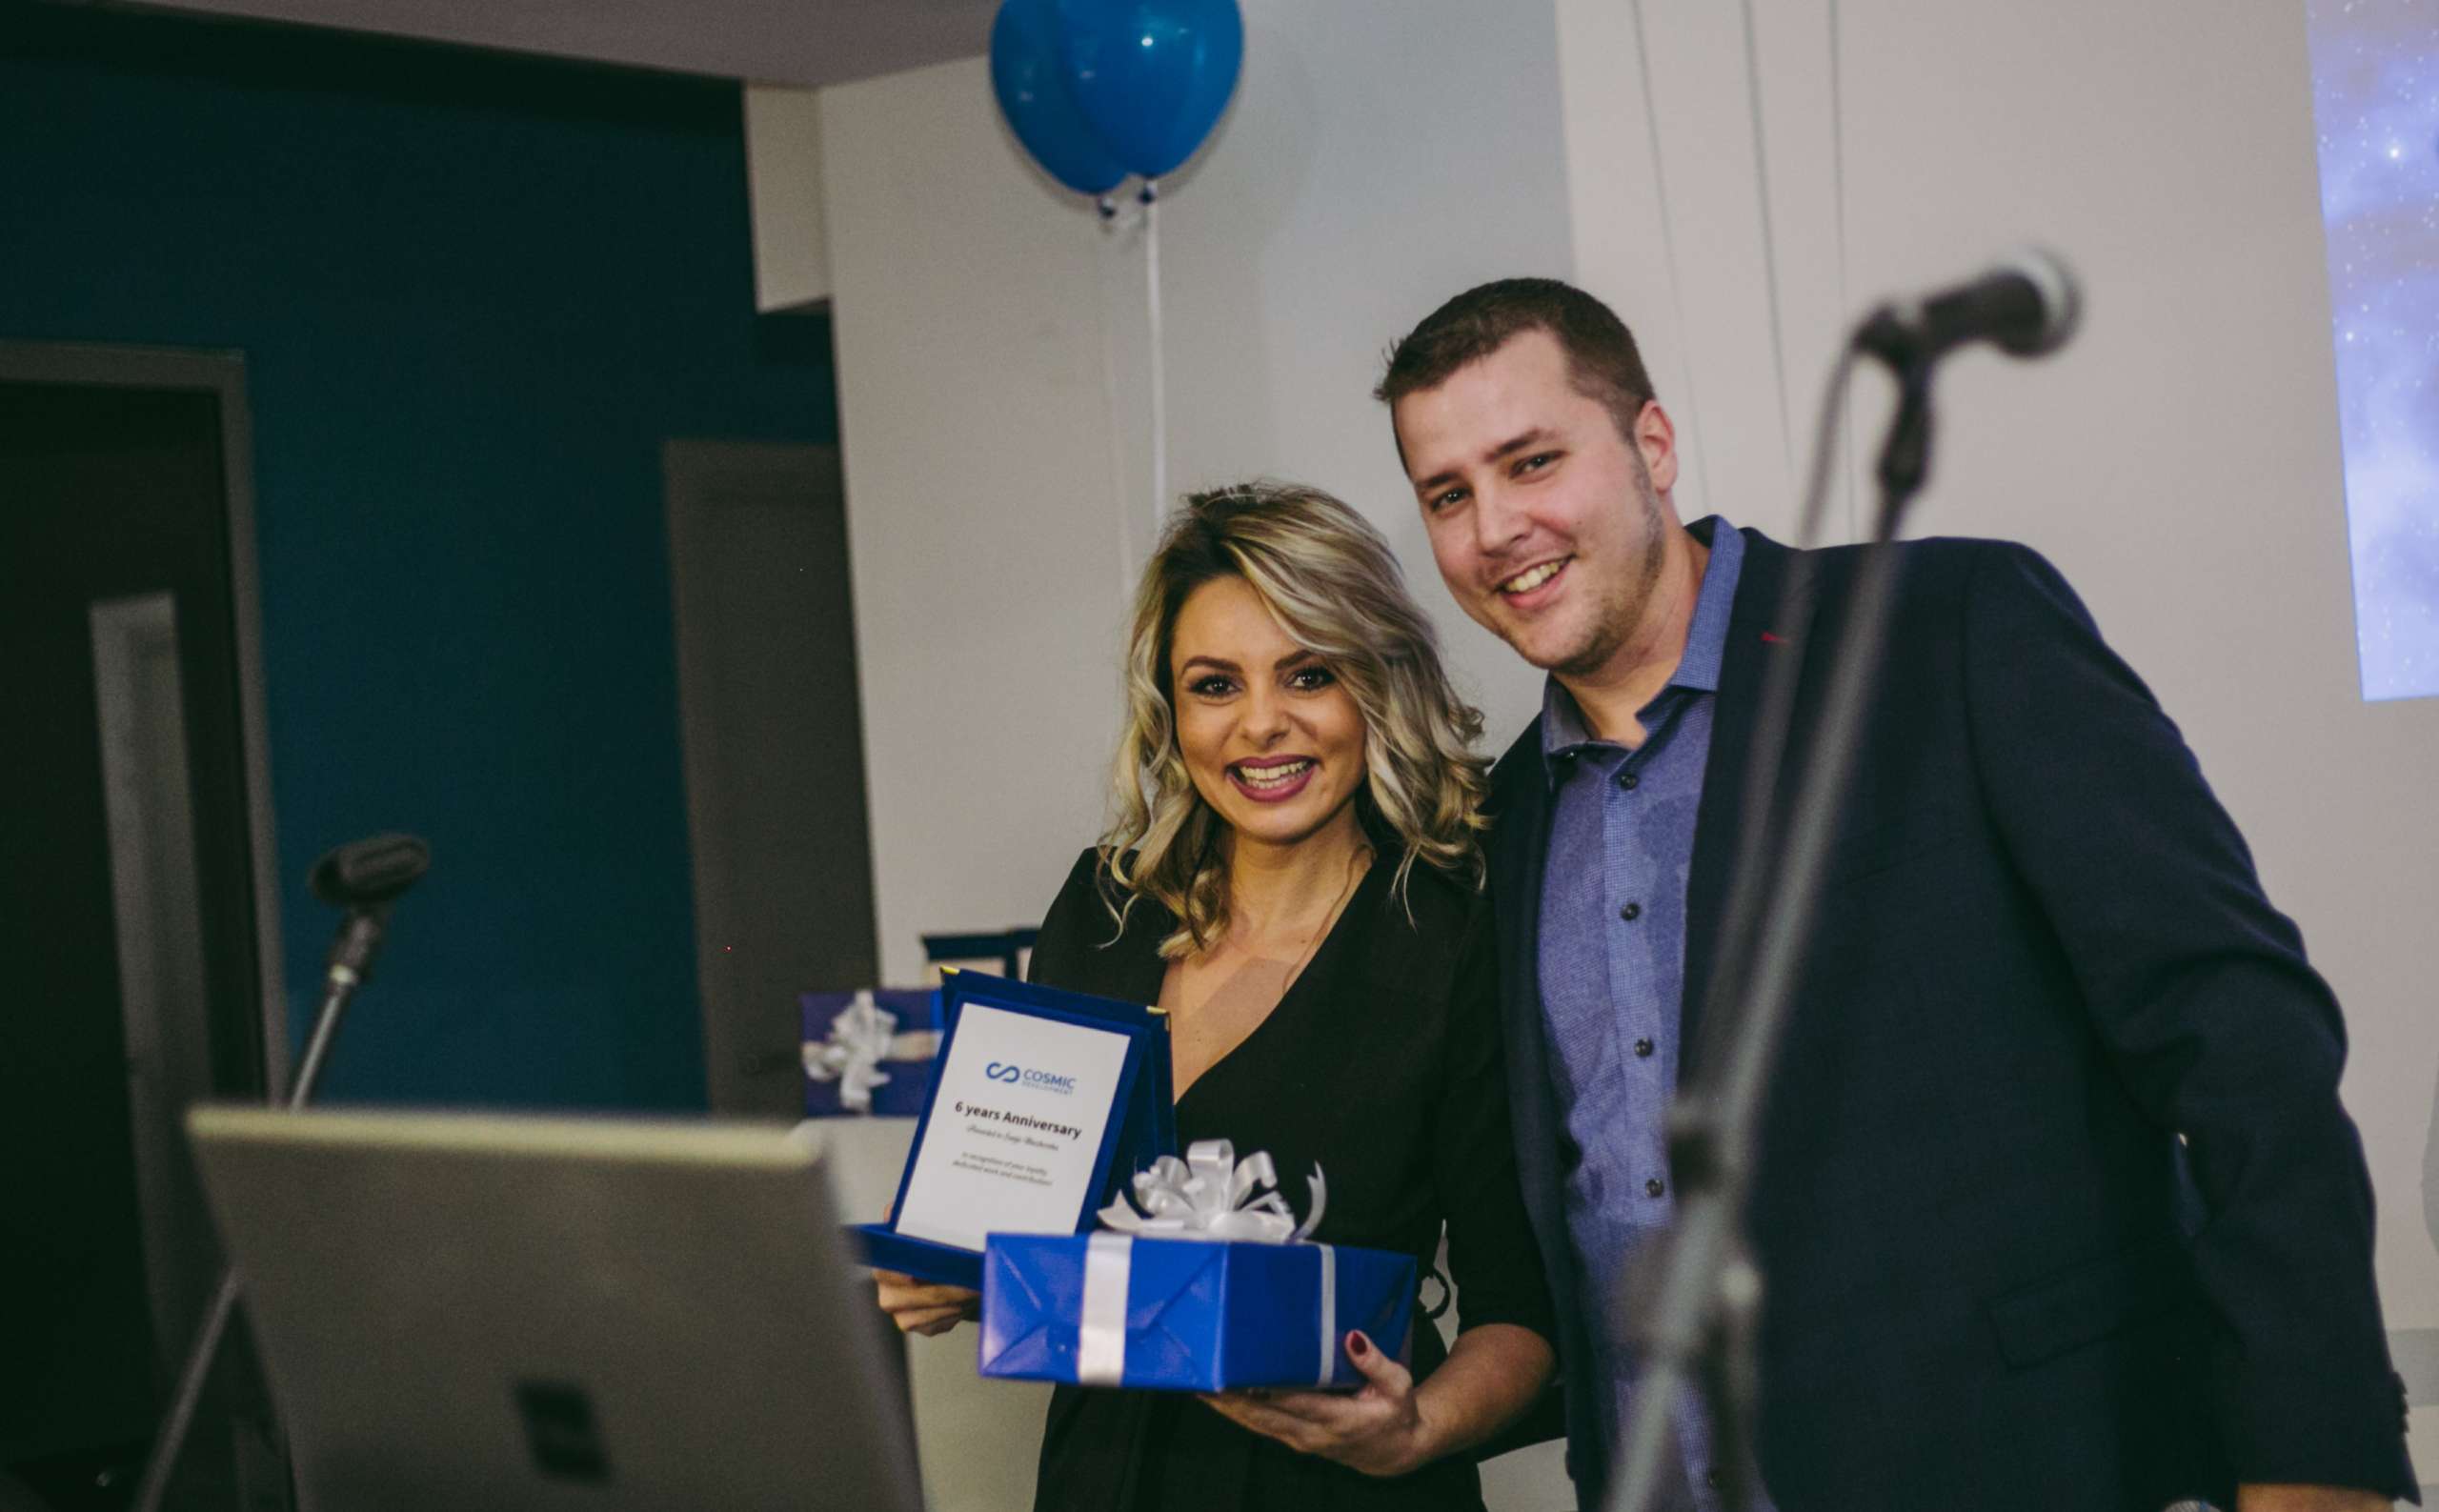 Our Office Manager Sanja Blazhevska and our CEO Ryan Milnes